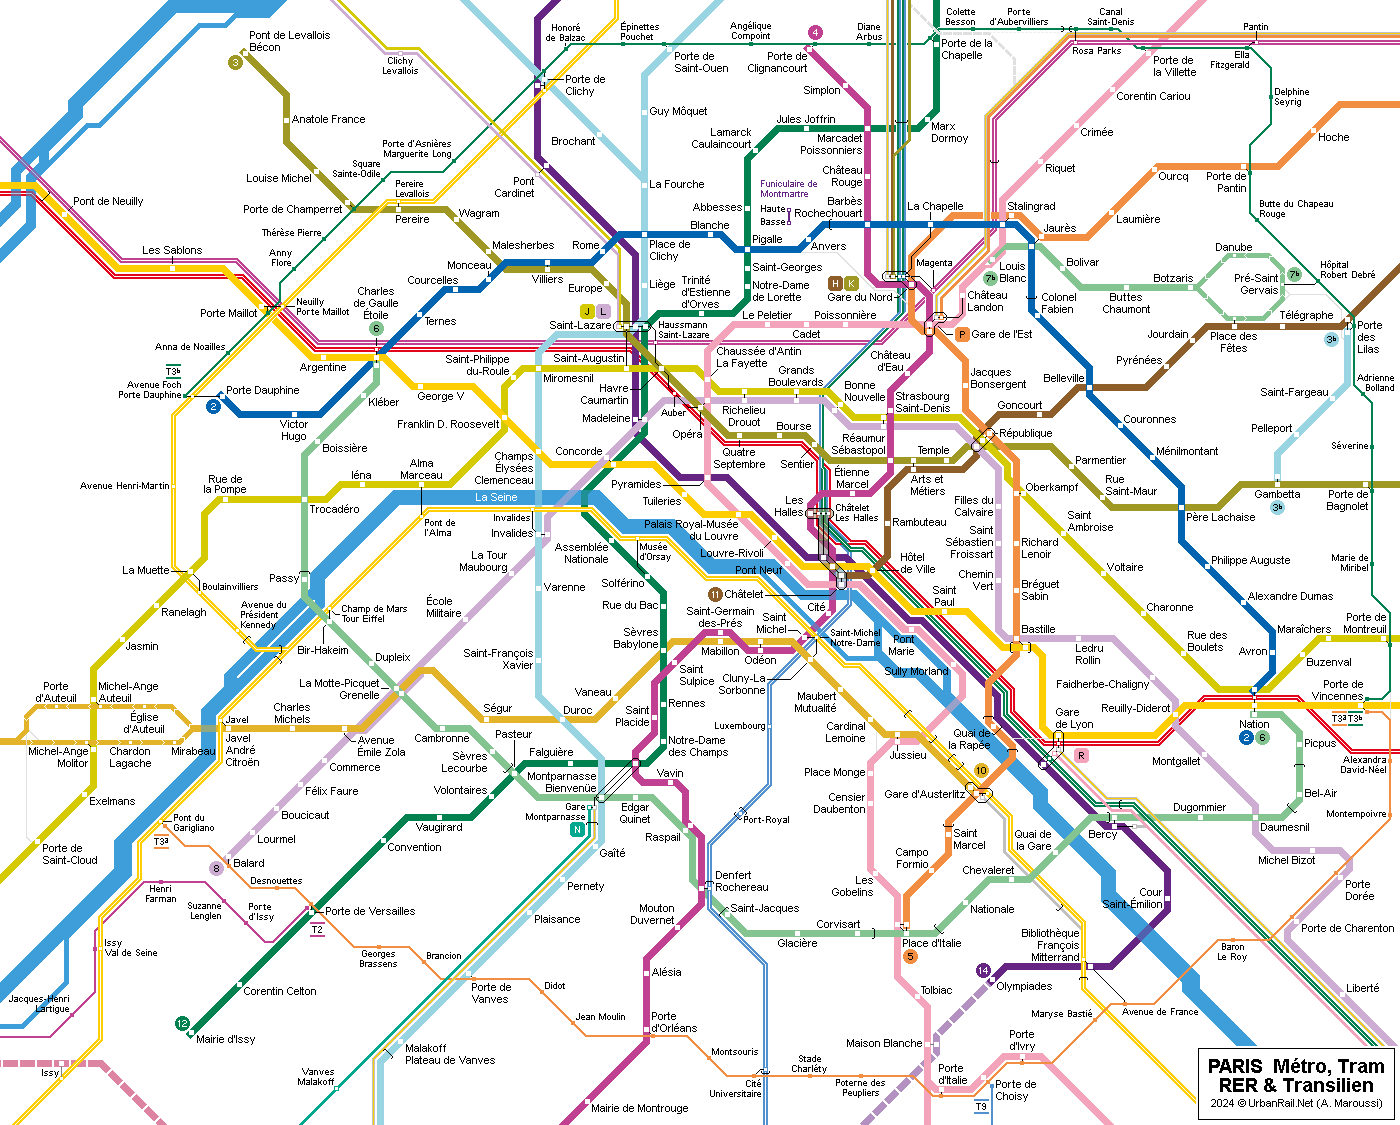 Paris Metro Map - Click on map to expand to full size